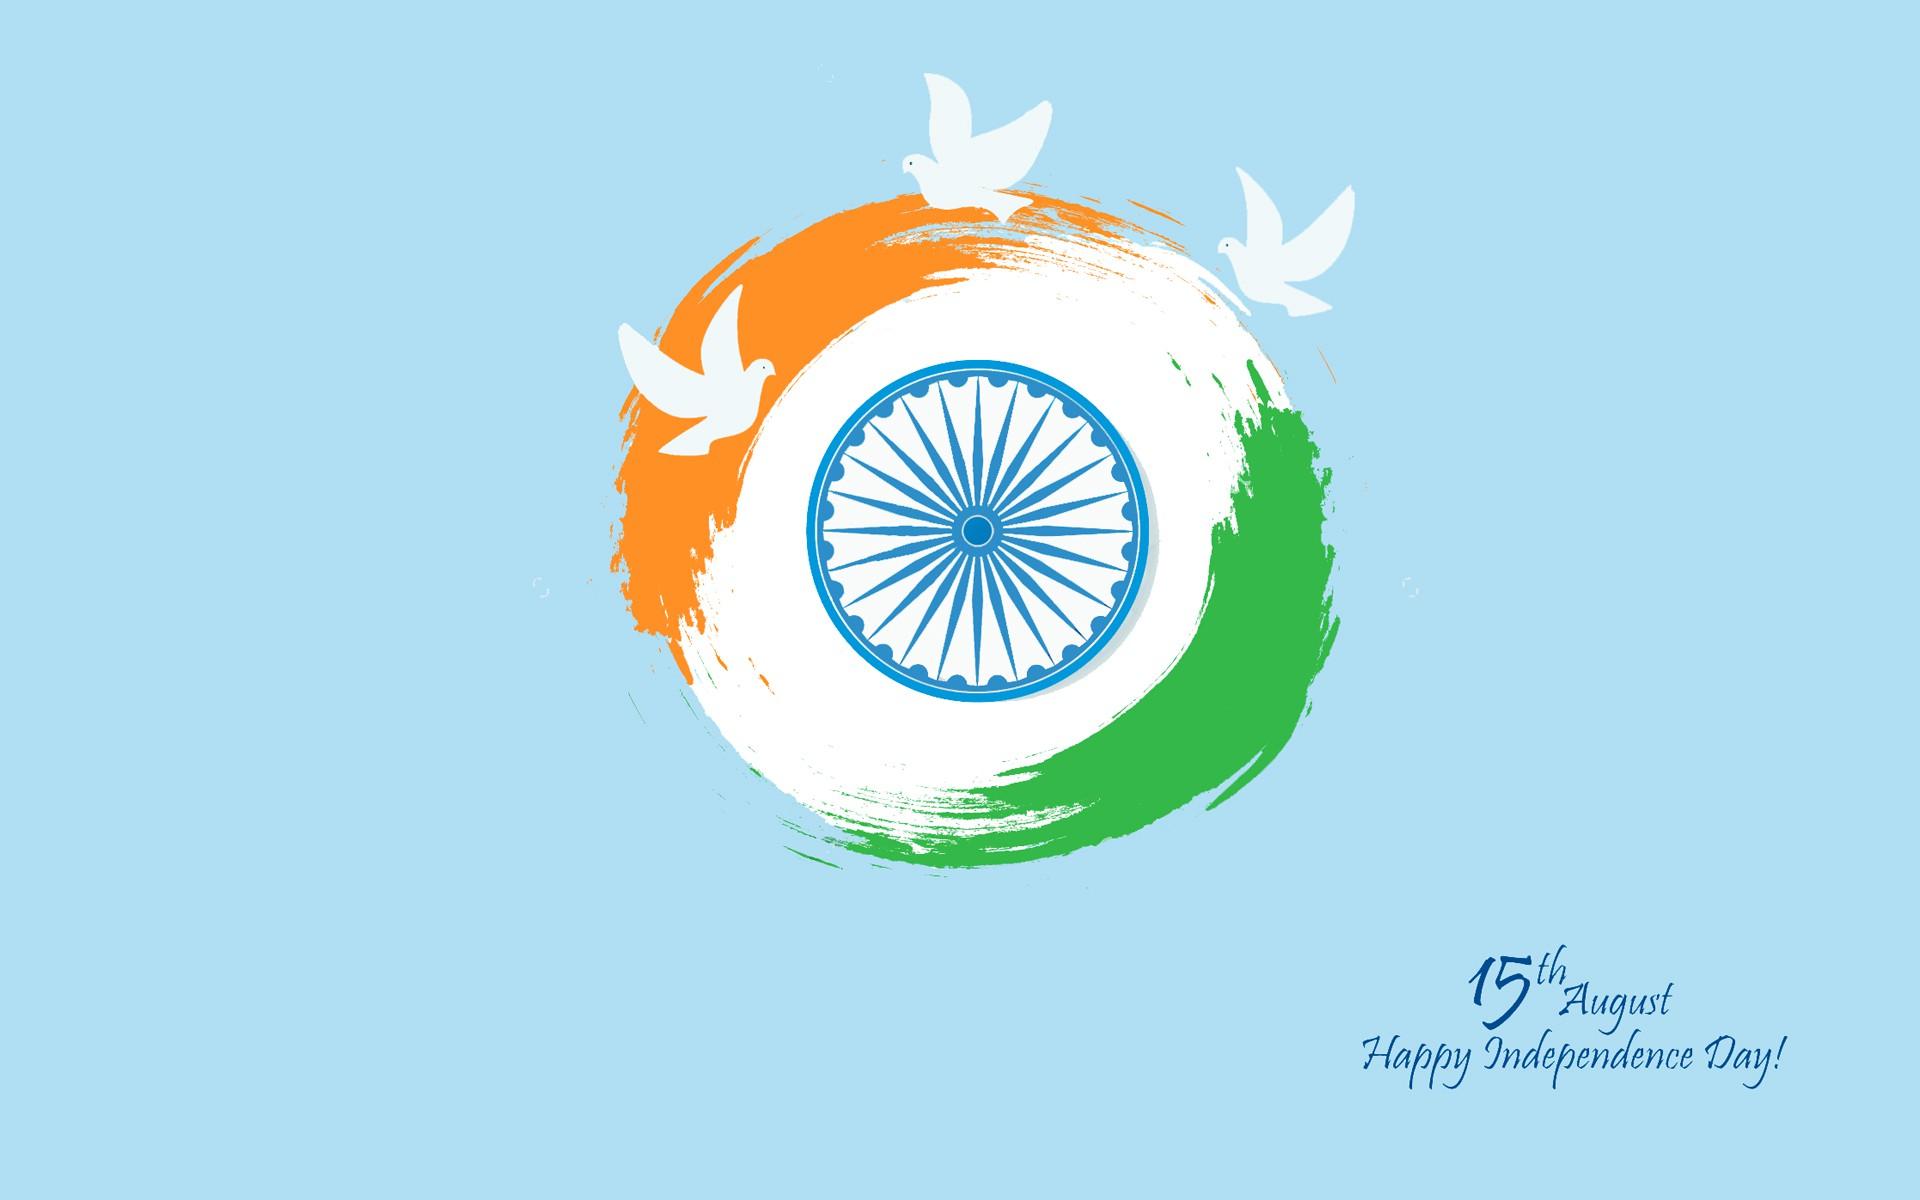 th August Happy Independence Day of INDIA Wishes wallpaper